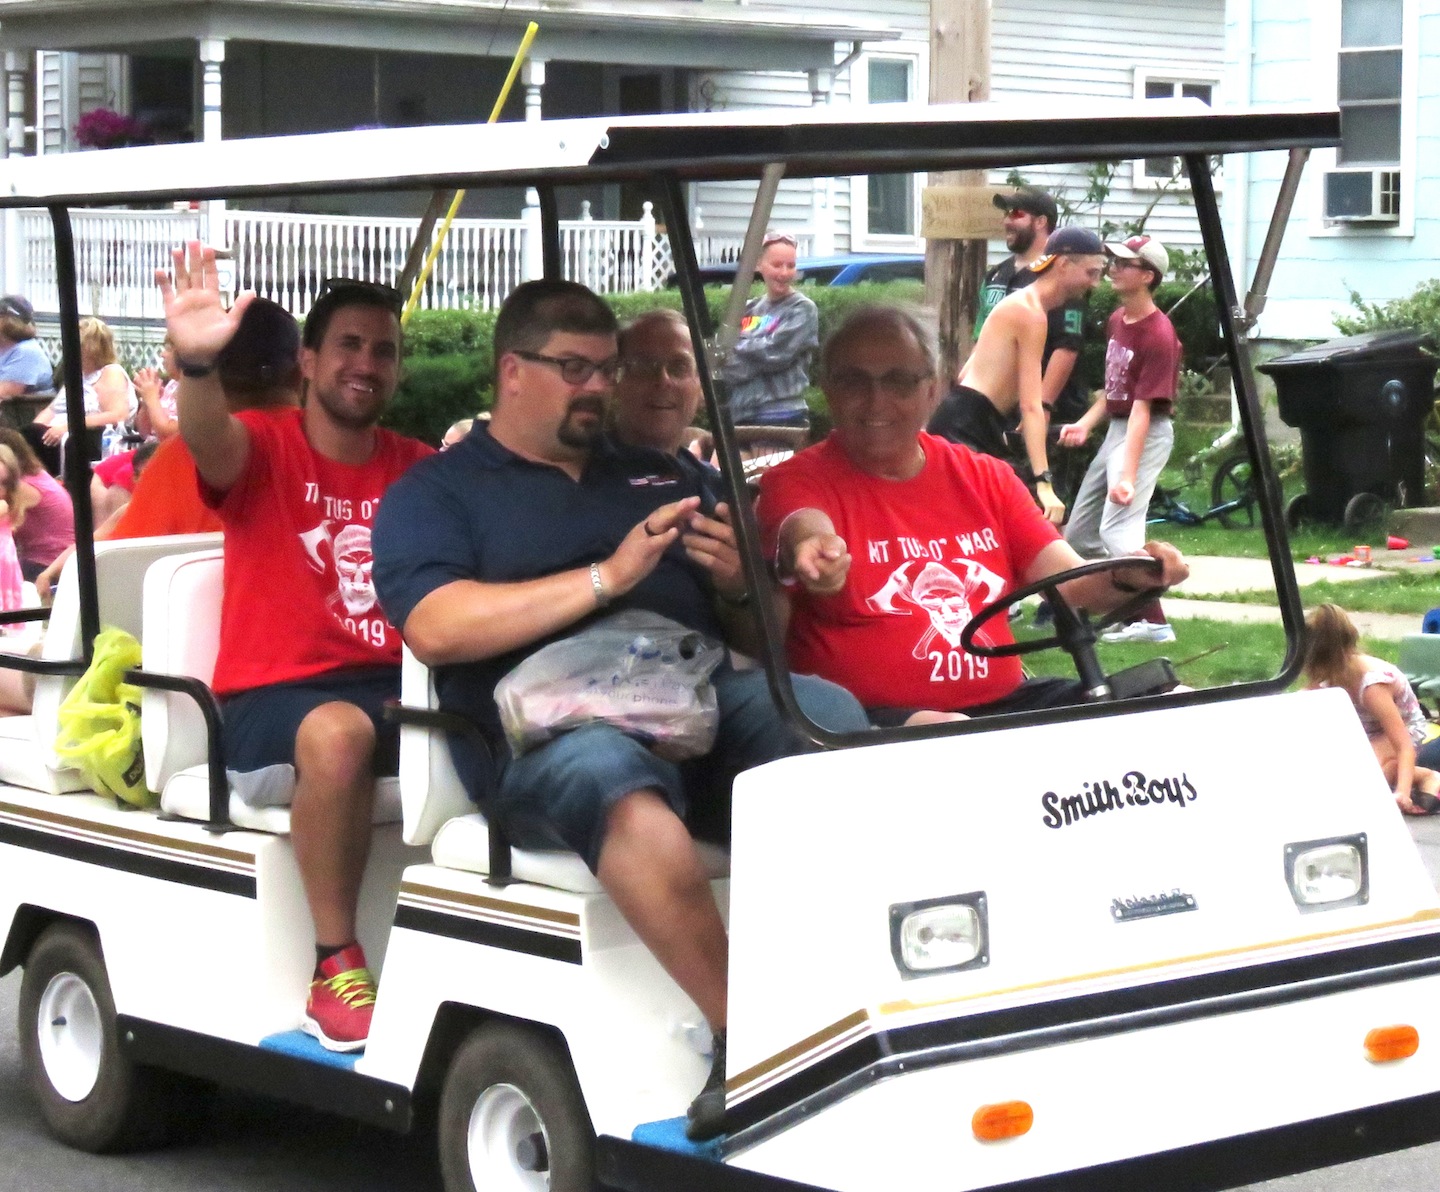 Above, North Tonawanda city officials -- Mayor Arthur Pappas (driving), Common Council President Eric Zadzilka (passenger seat), Alderman Mark Berube (back seat, at right) and Administrative Assistant Dan DiVirgilio (back seat, at left) -- stroll through the Canal Fest Parade in a golf cart. Pappas and NT officials were happy campers, as the North Tonawanda side won the tug-of-war battle, earlier in the day. 